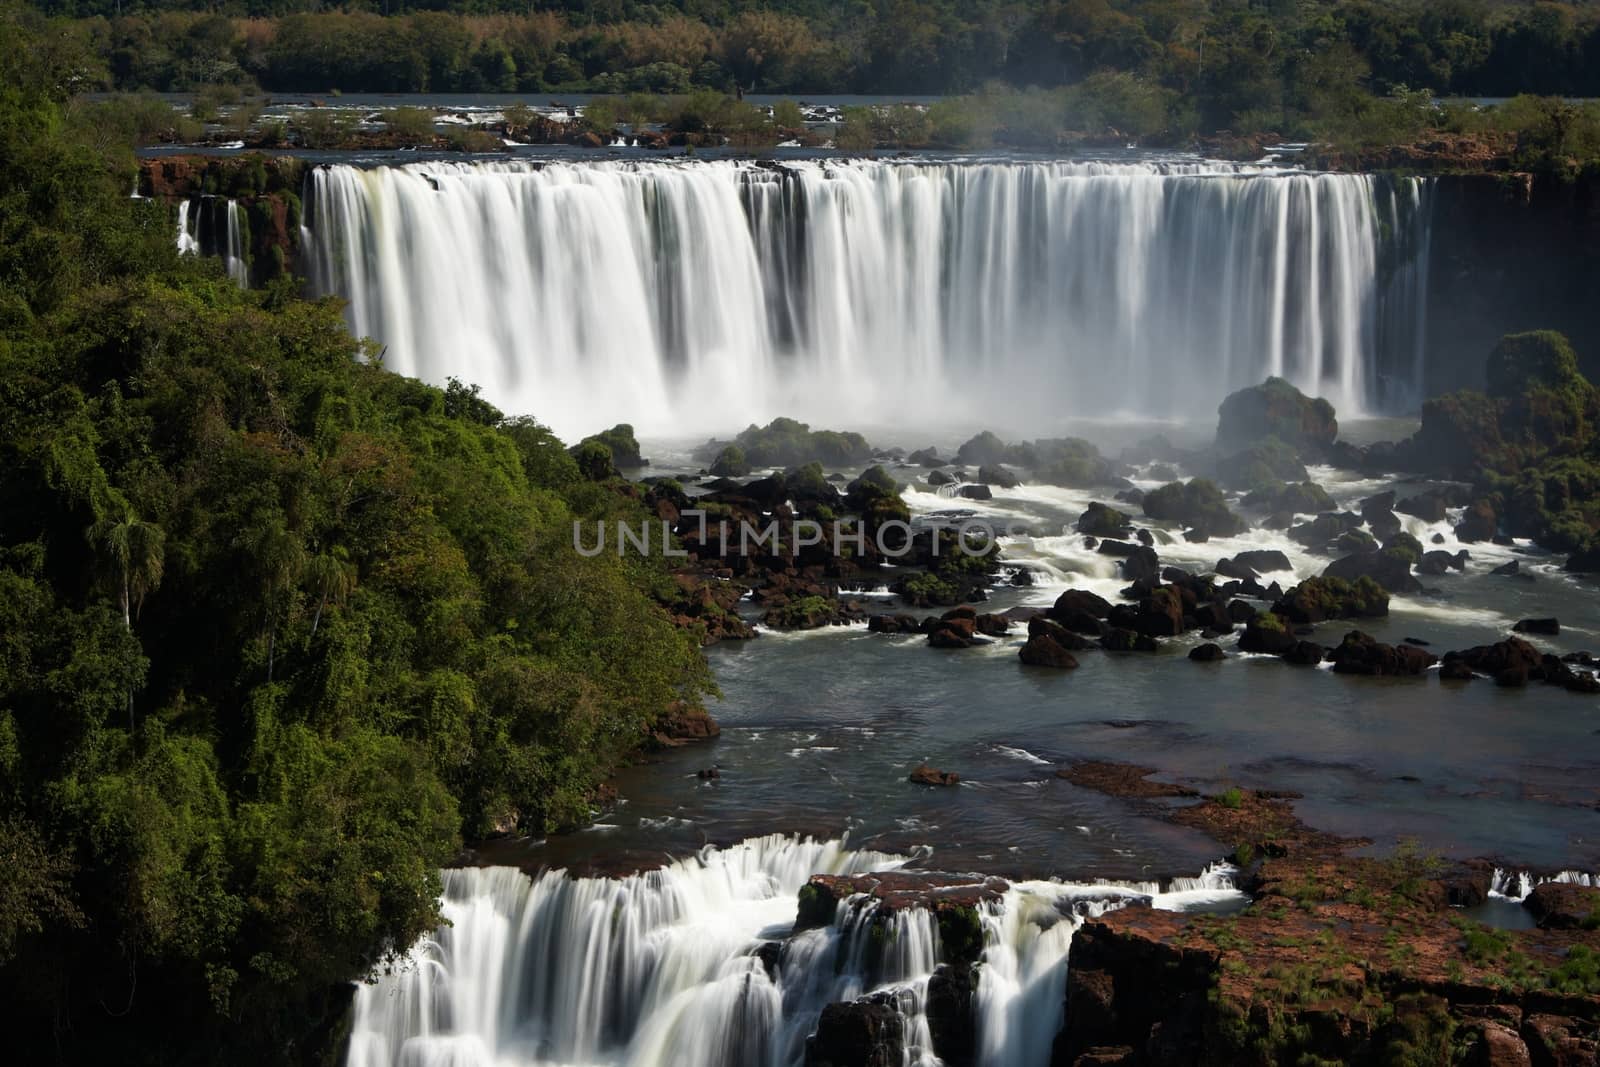 Iguazu Falls located on the border of Brazil and Argentina